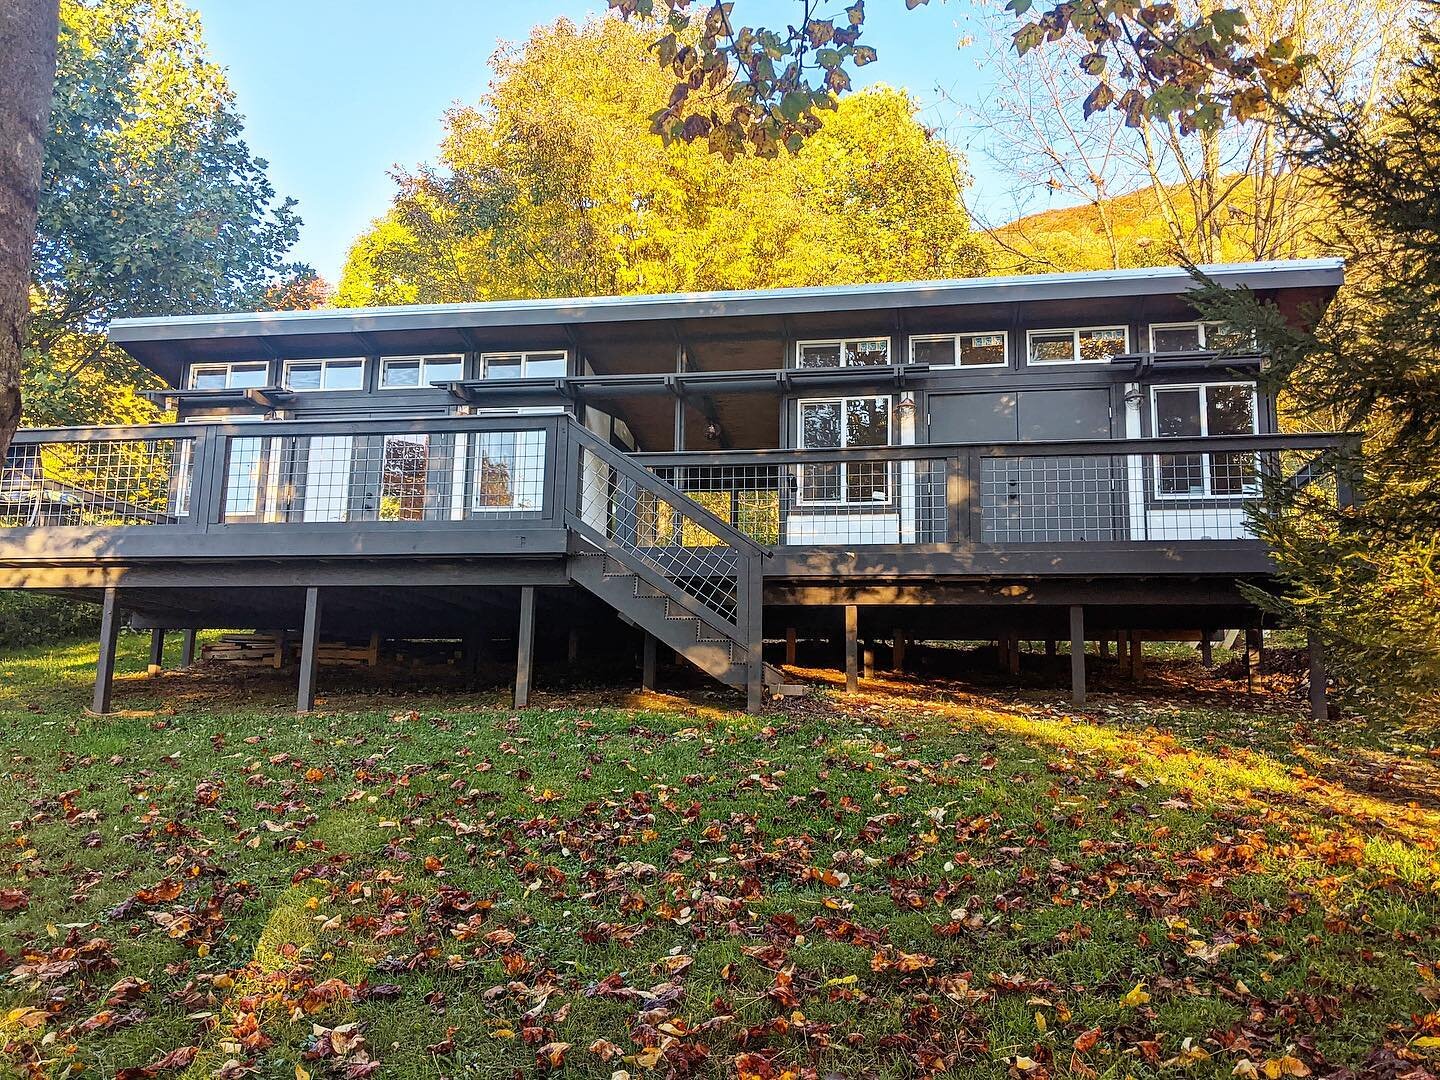 Another look at our #MorHaus in #BooneNC in these beautiful fall colors!! &mdash;--&gt; Swipe right to see the inside 😍✨&bull;

tinyhouse #tinyhomes #substainableliving #boonenc #charlottenc #northcarolinahomes #northcarolina #ncarcitecture #modular